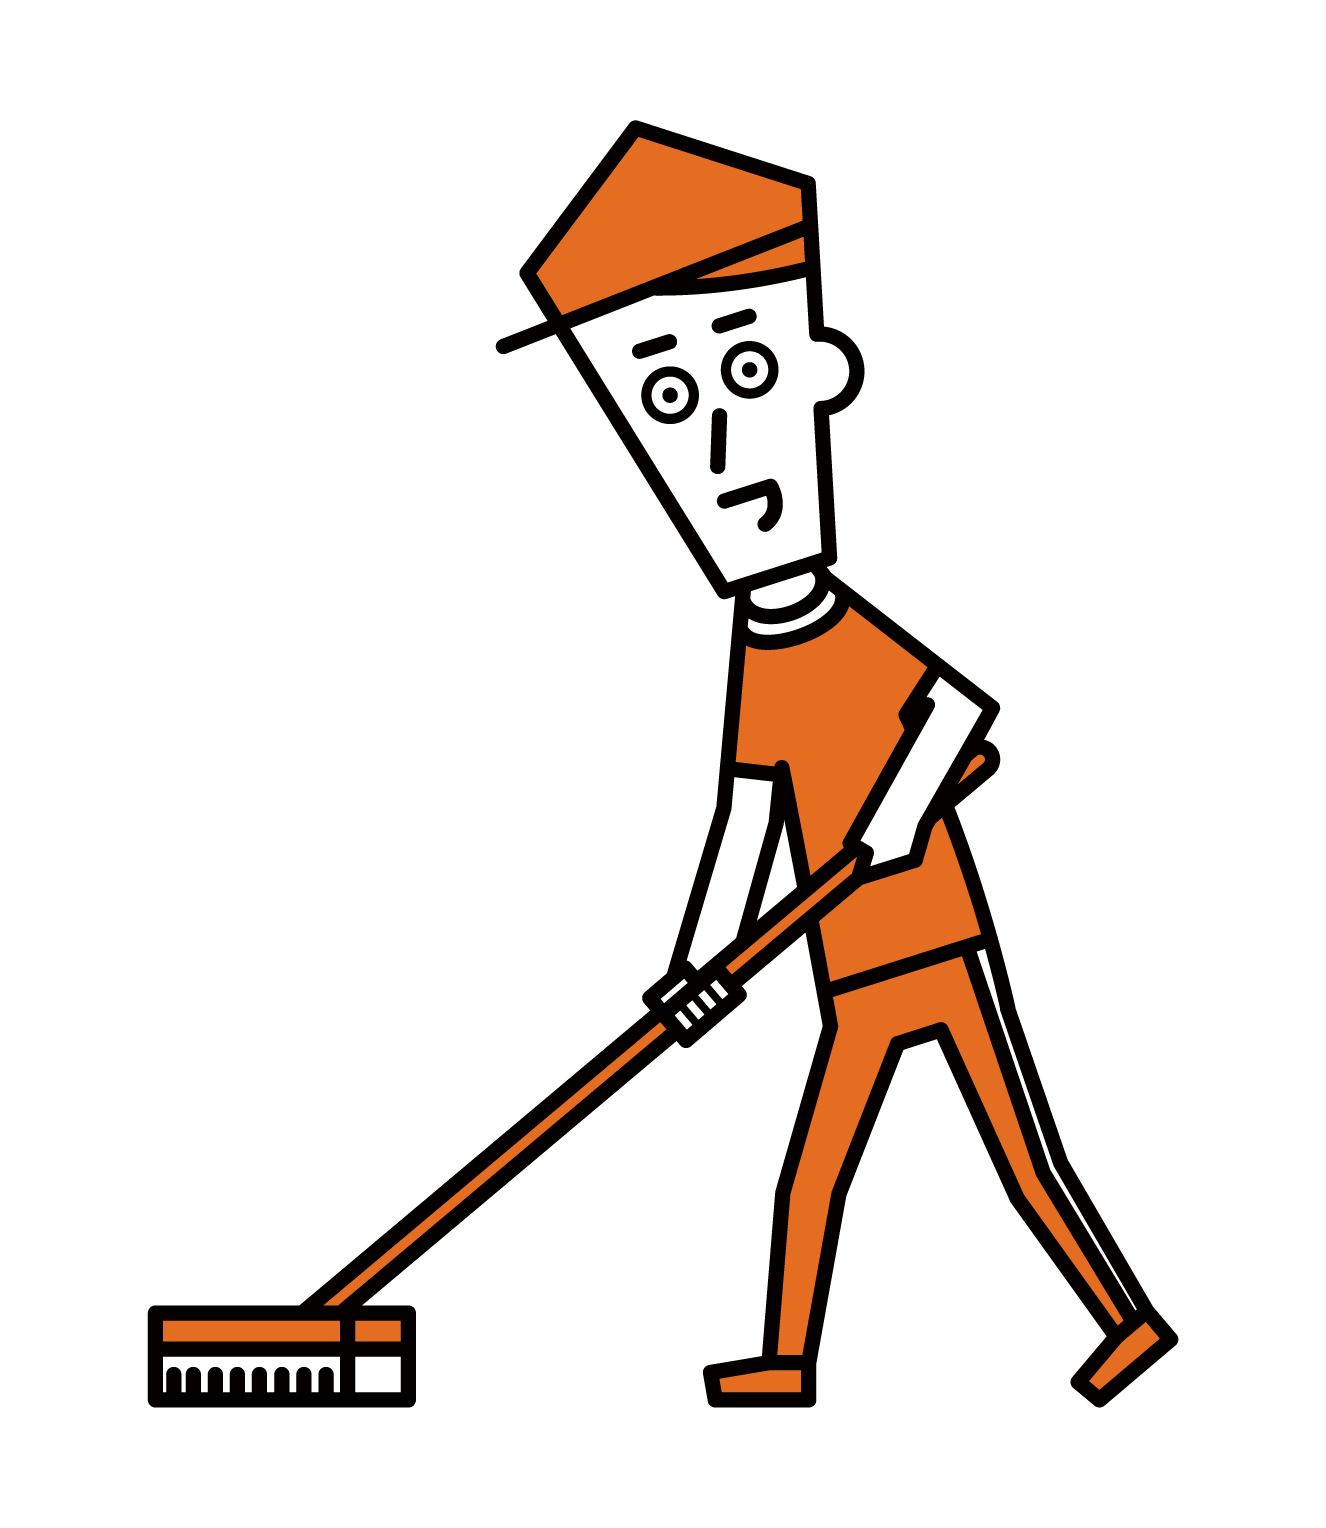 Illustration of the groundkeeper (male)